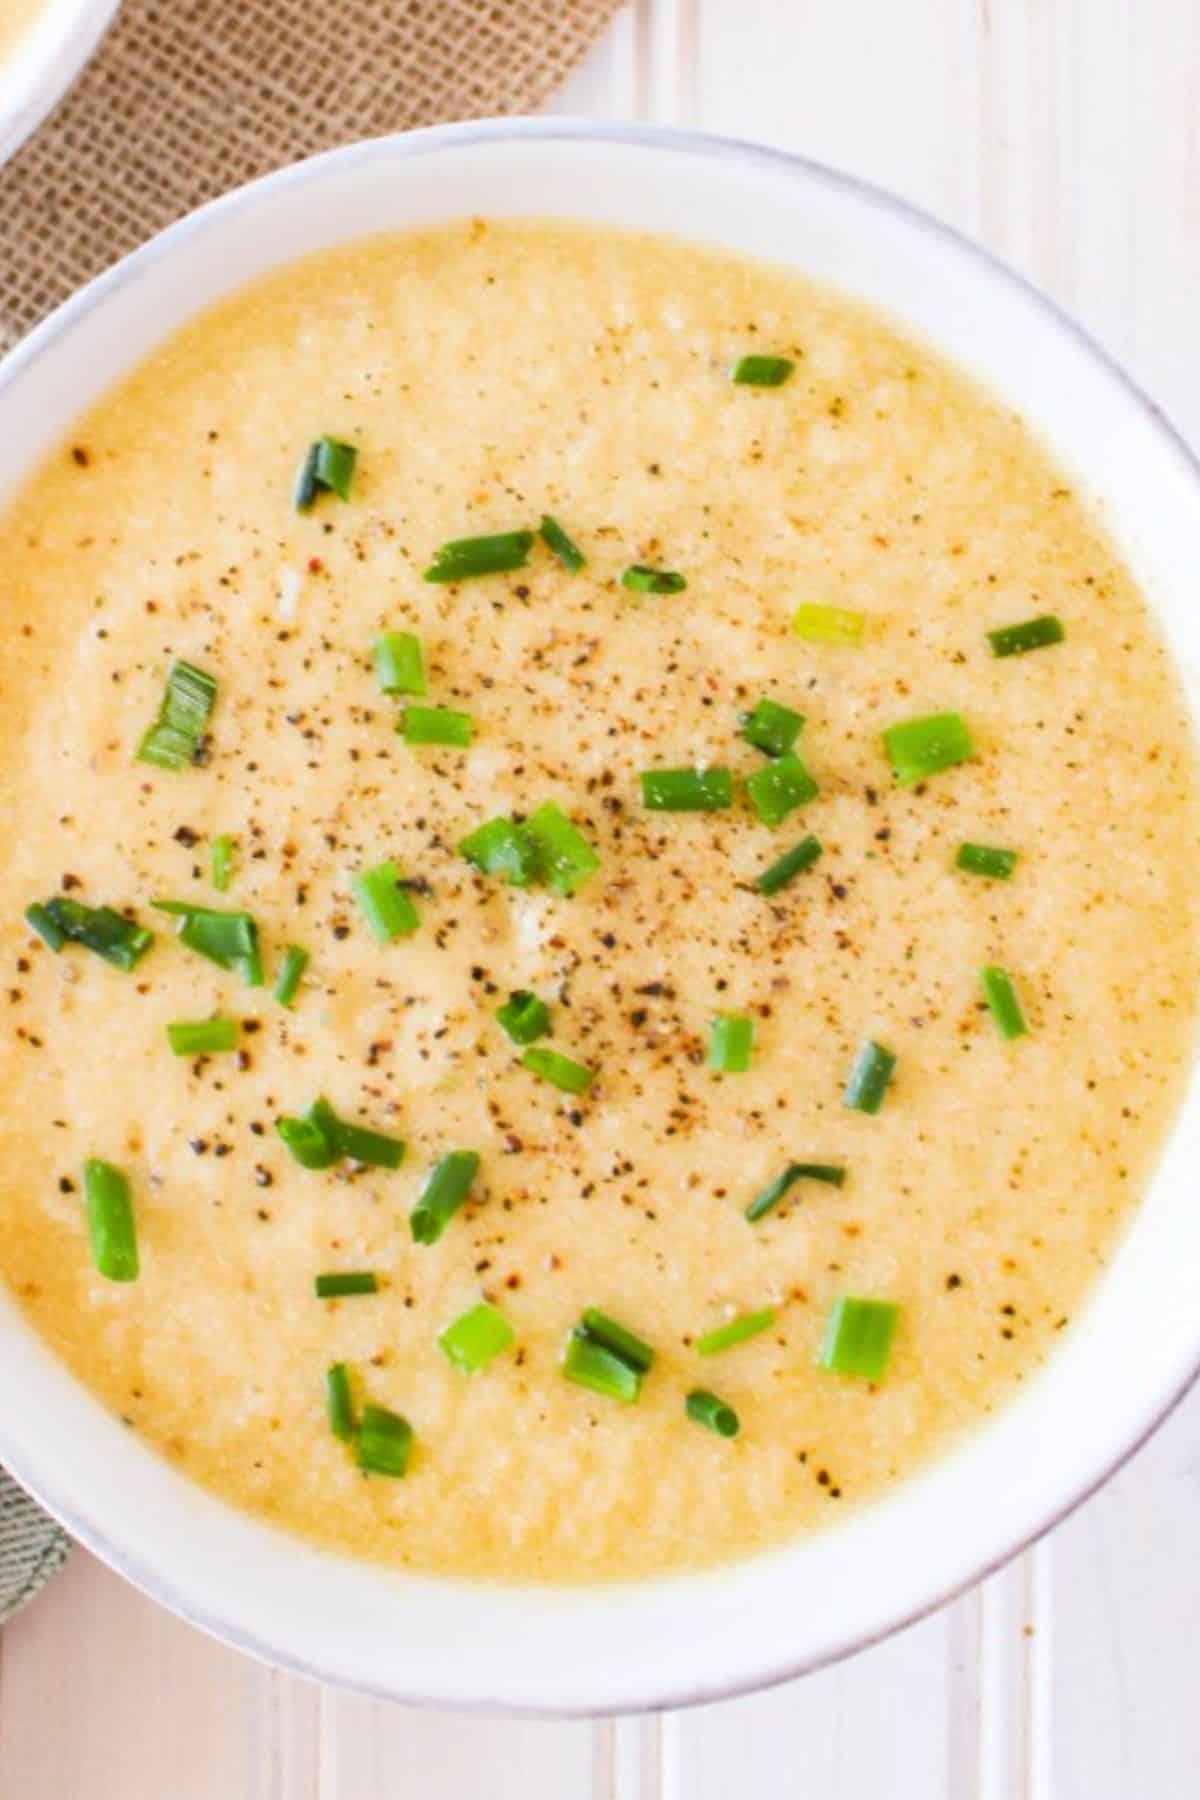 Creamy vegan potato leek soup topped with chives and black pepper.